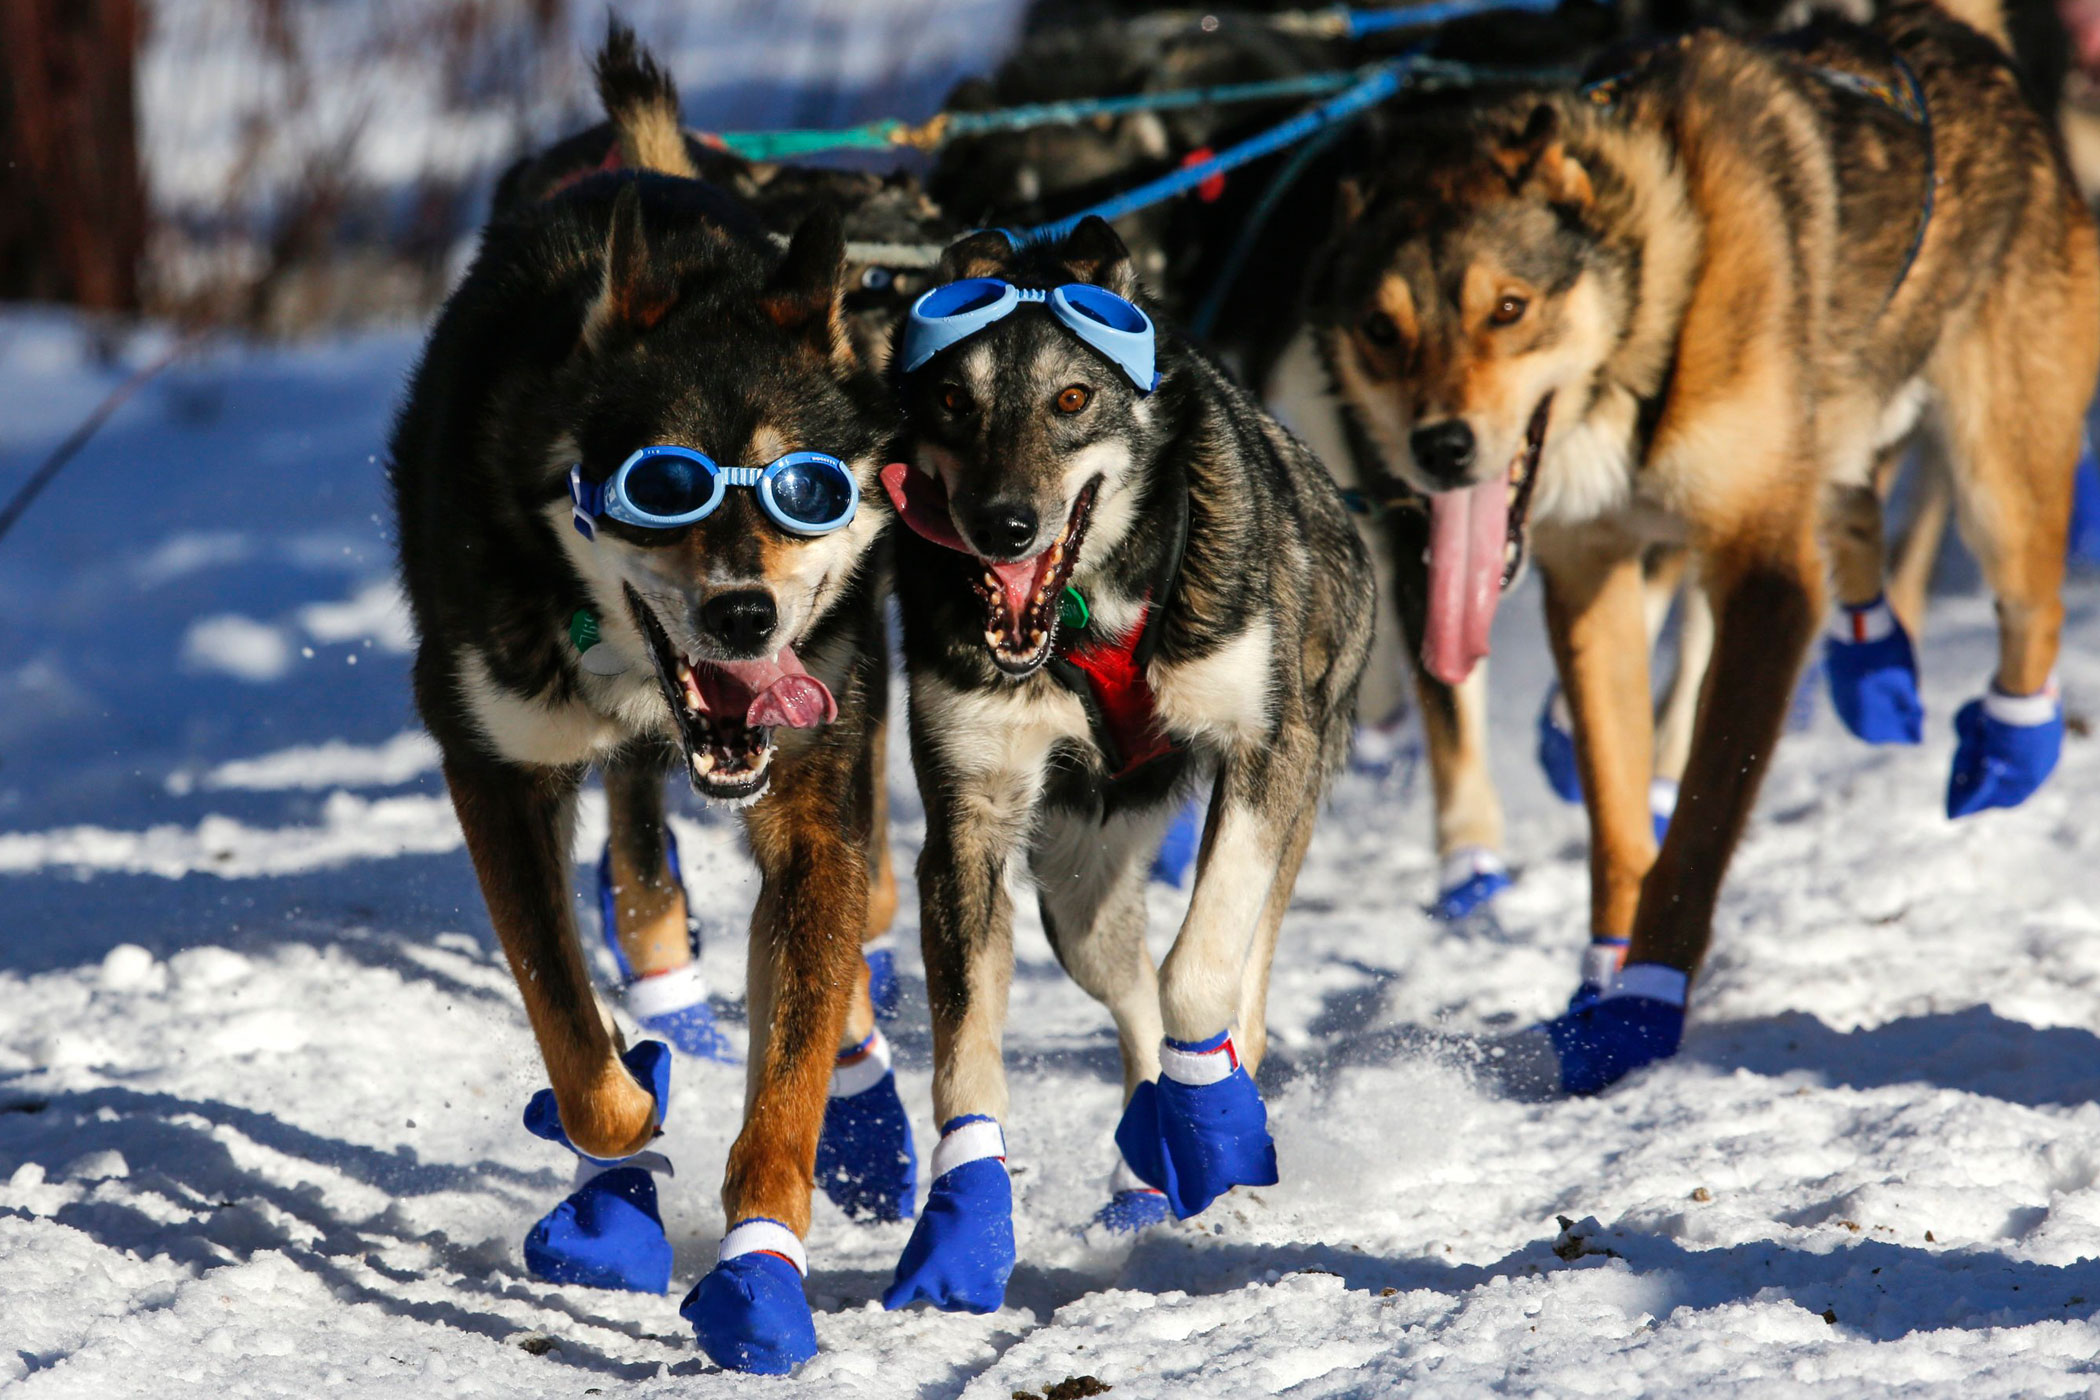 Cody Strathe's team leaves the restart of the Iditarod Trail Sled Dog Race in Willow, Alaska on March 6.